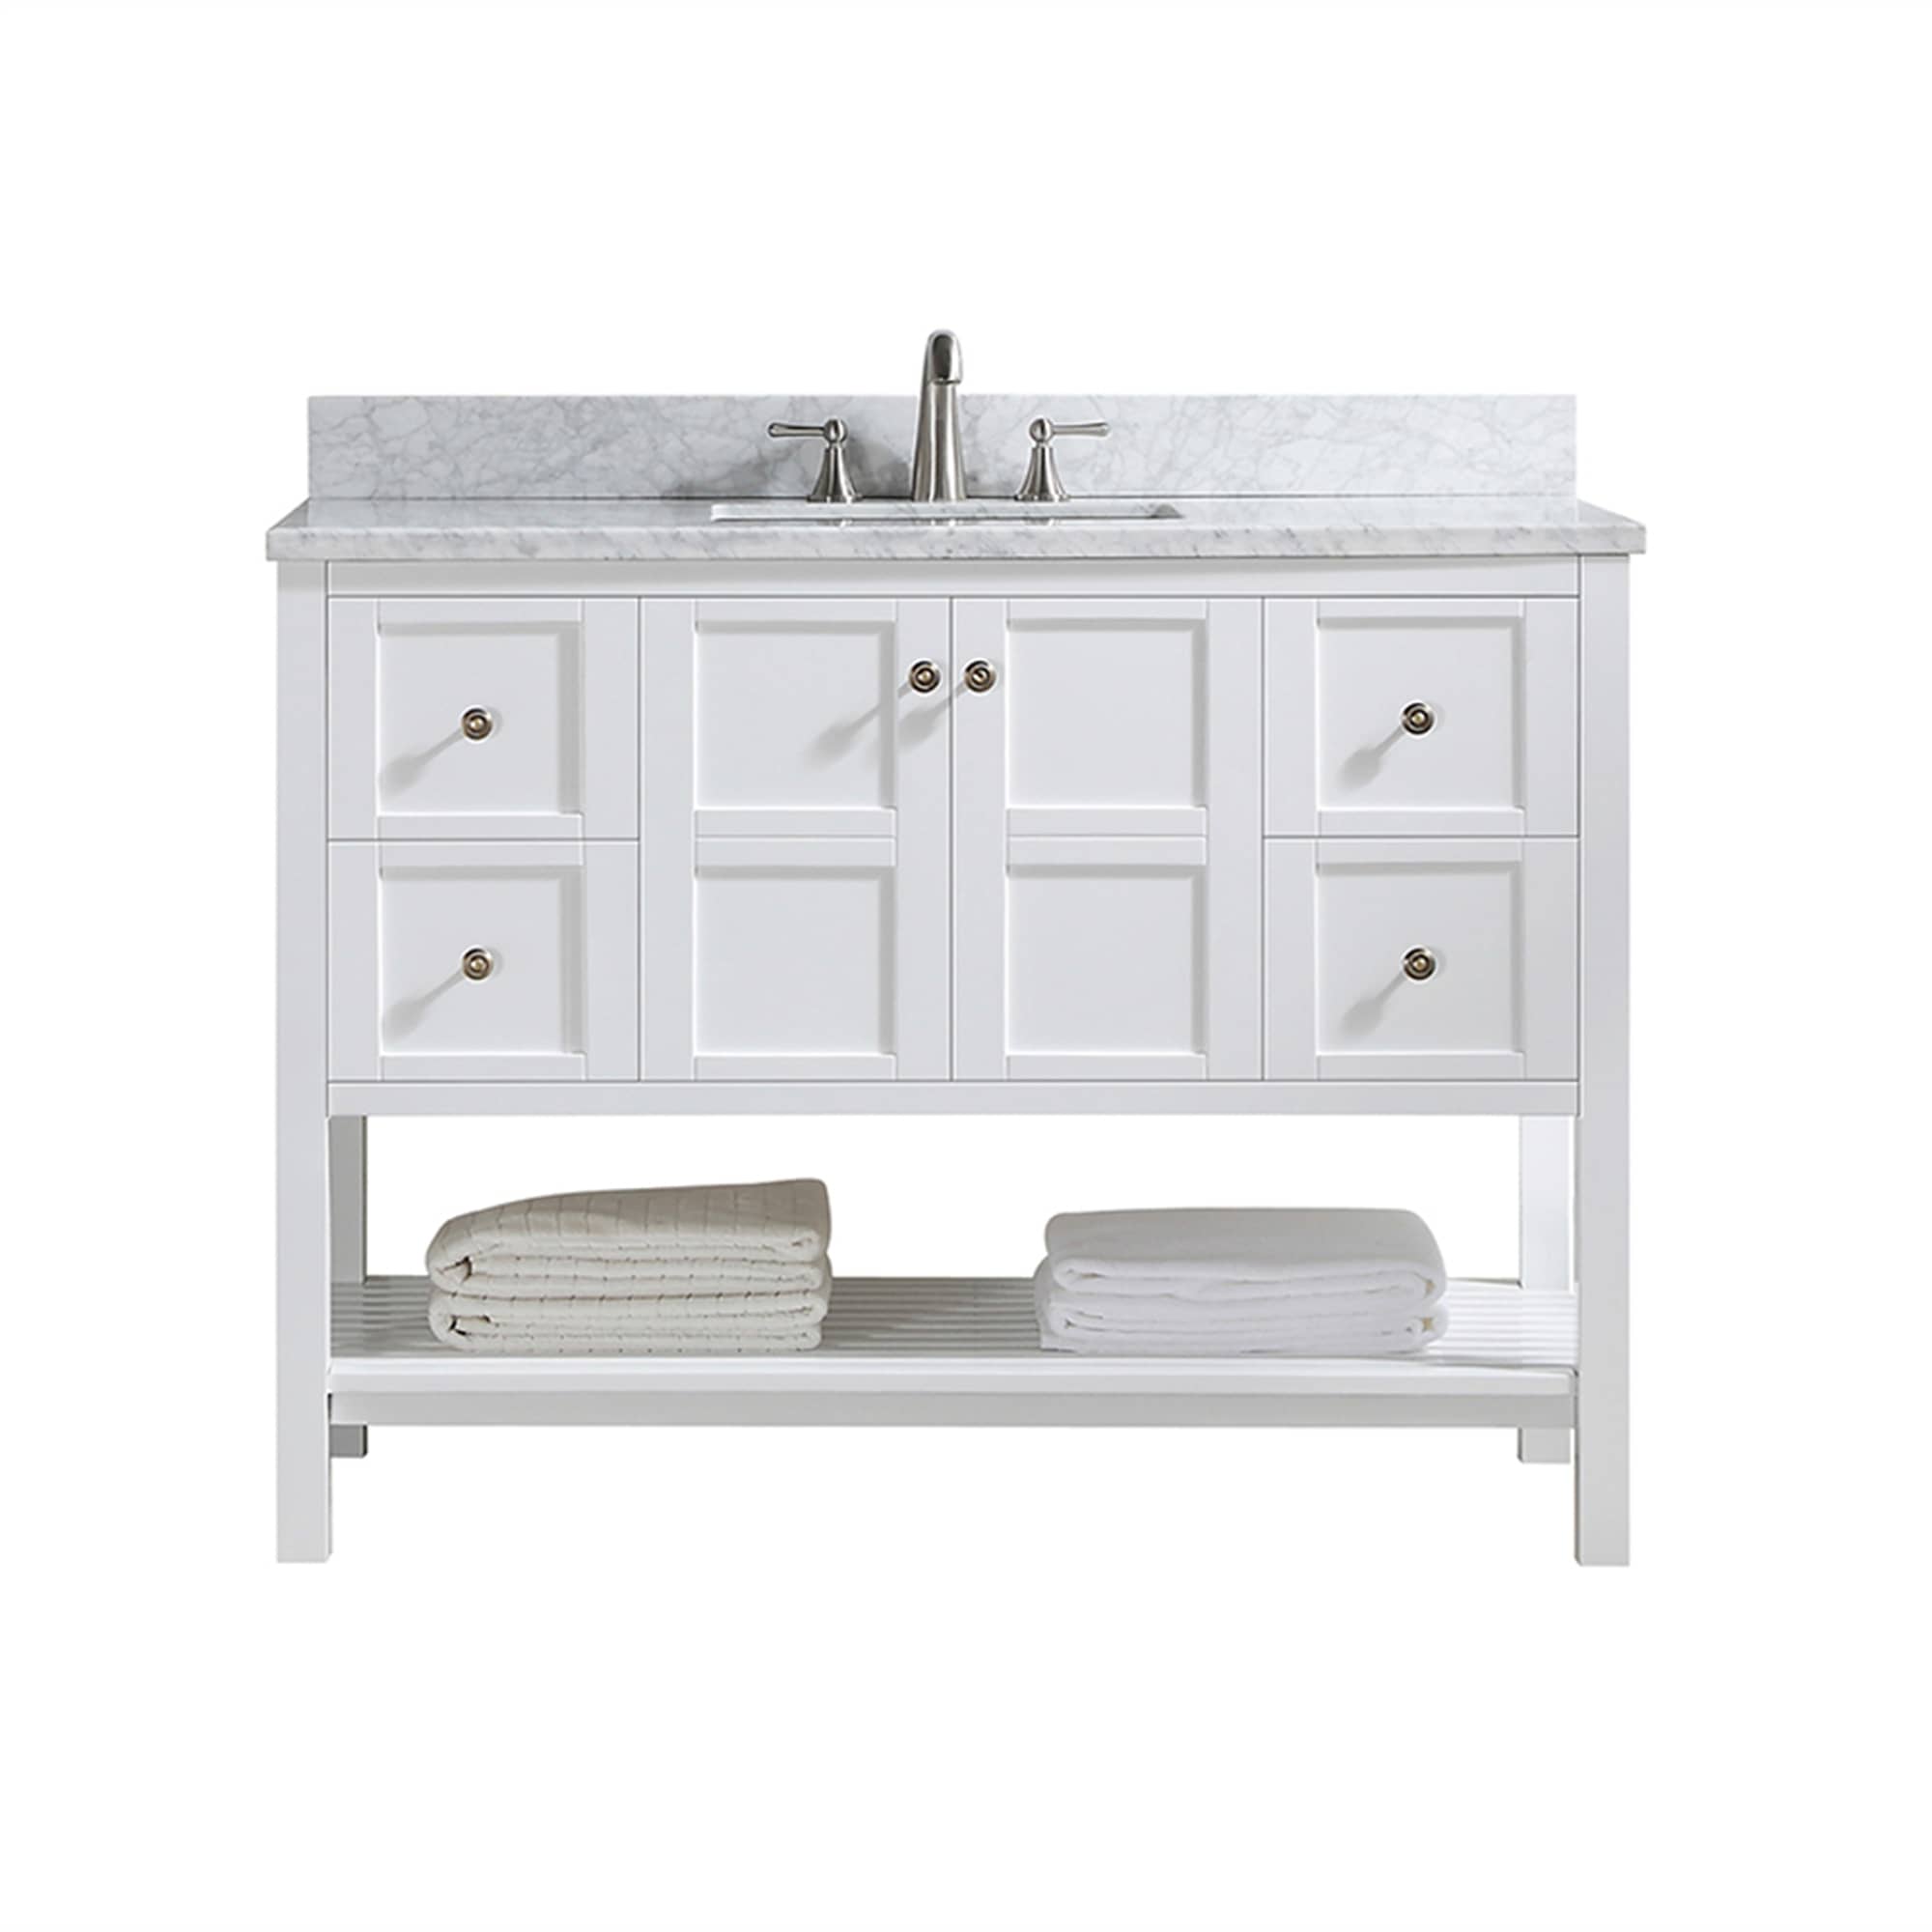 CASAINC 48 Inch Bath Vanity in White with White Top and Basin (48W x 22D x 35.4"H )